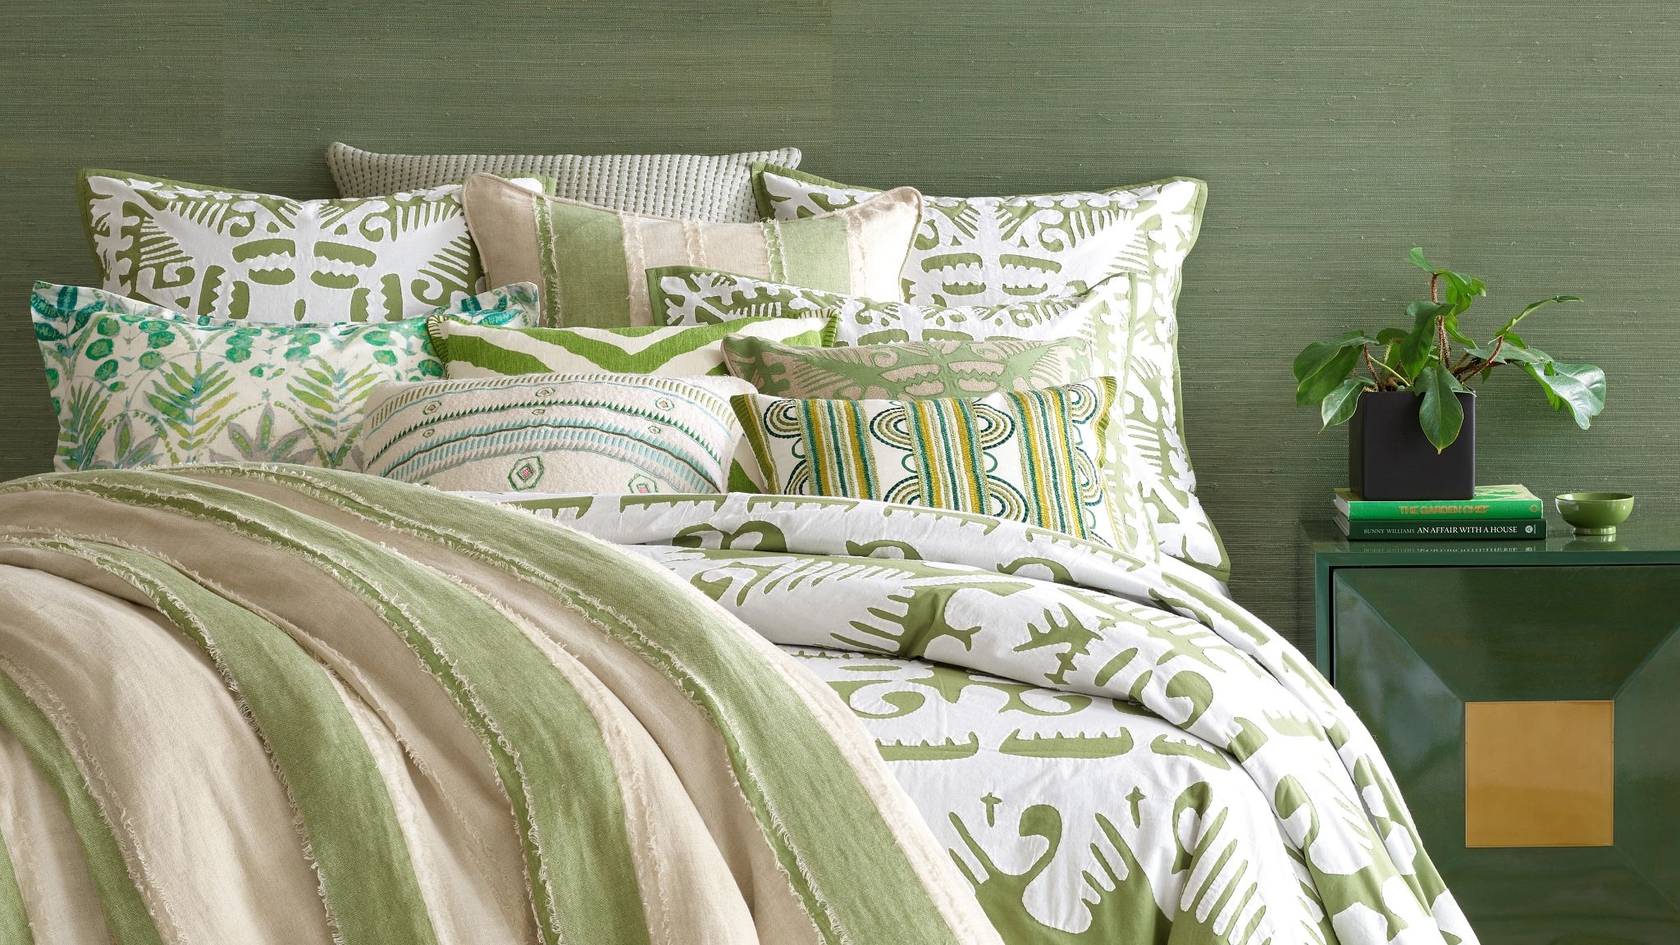 Choose Between a Duvet Cover, Quilt and Coverlet